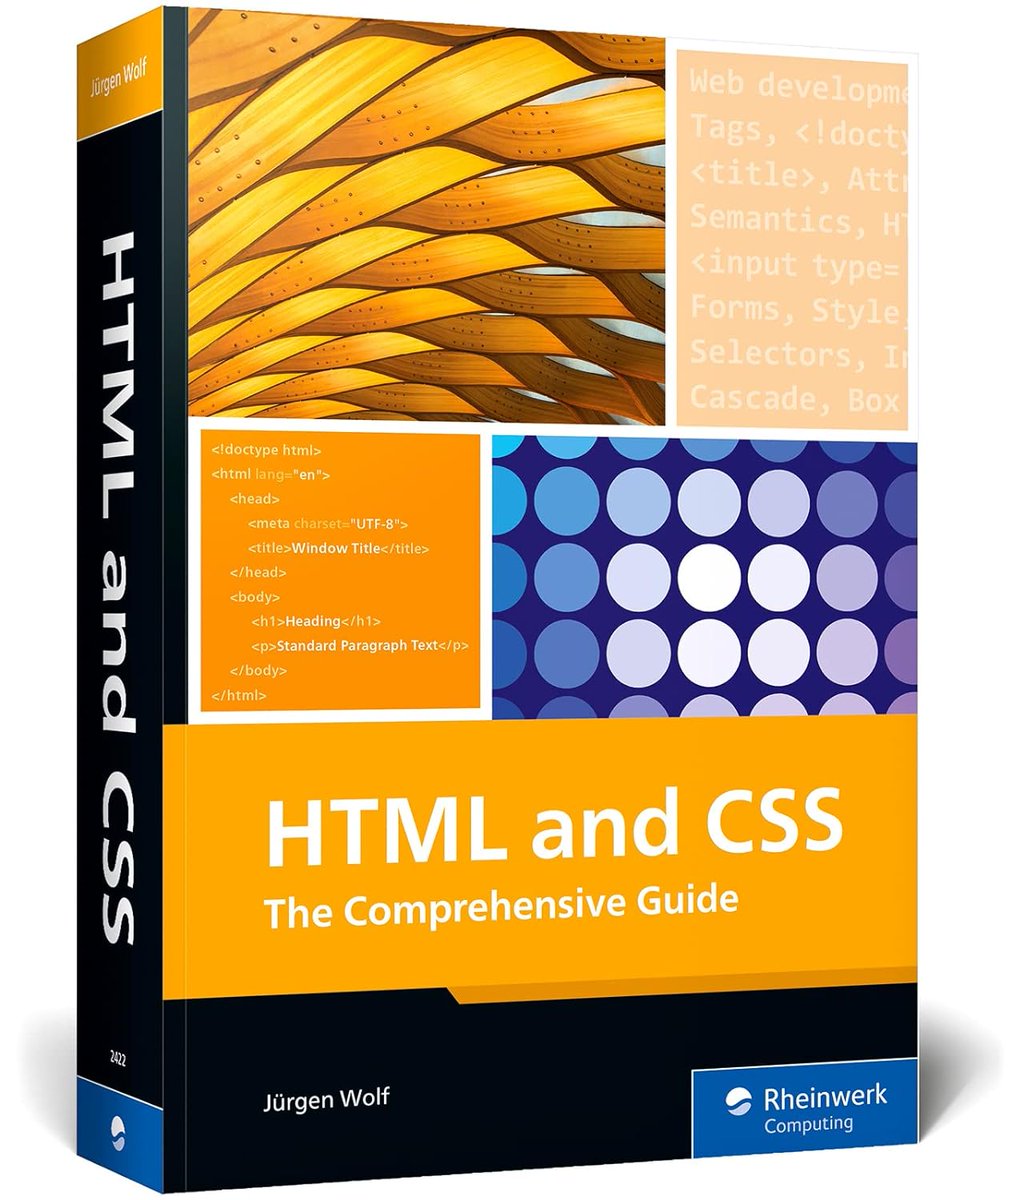 HTML and CSS: The Comprehensive Guide amzn.to/43YkzCt

#html #html5 #programming #developer #programmer #coding #coder #softwaredeveloper #computerscience